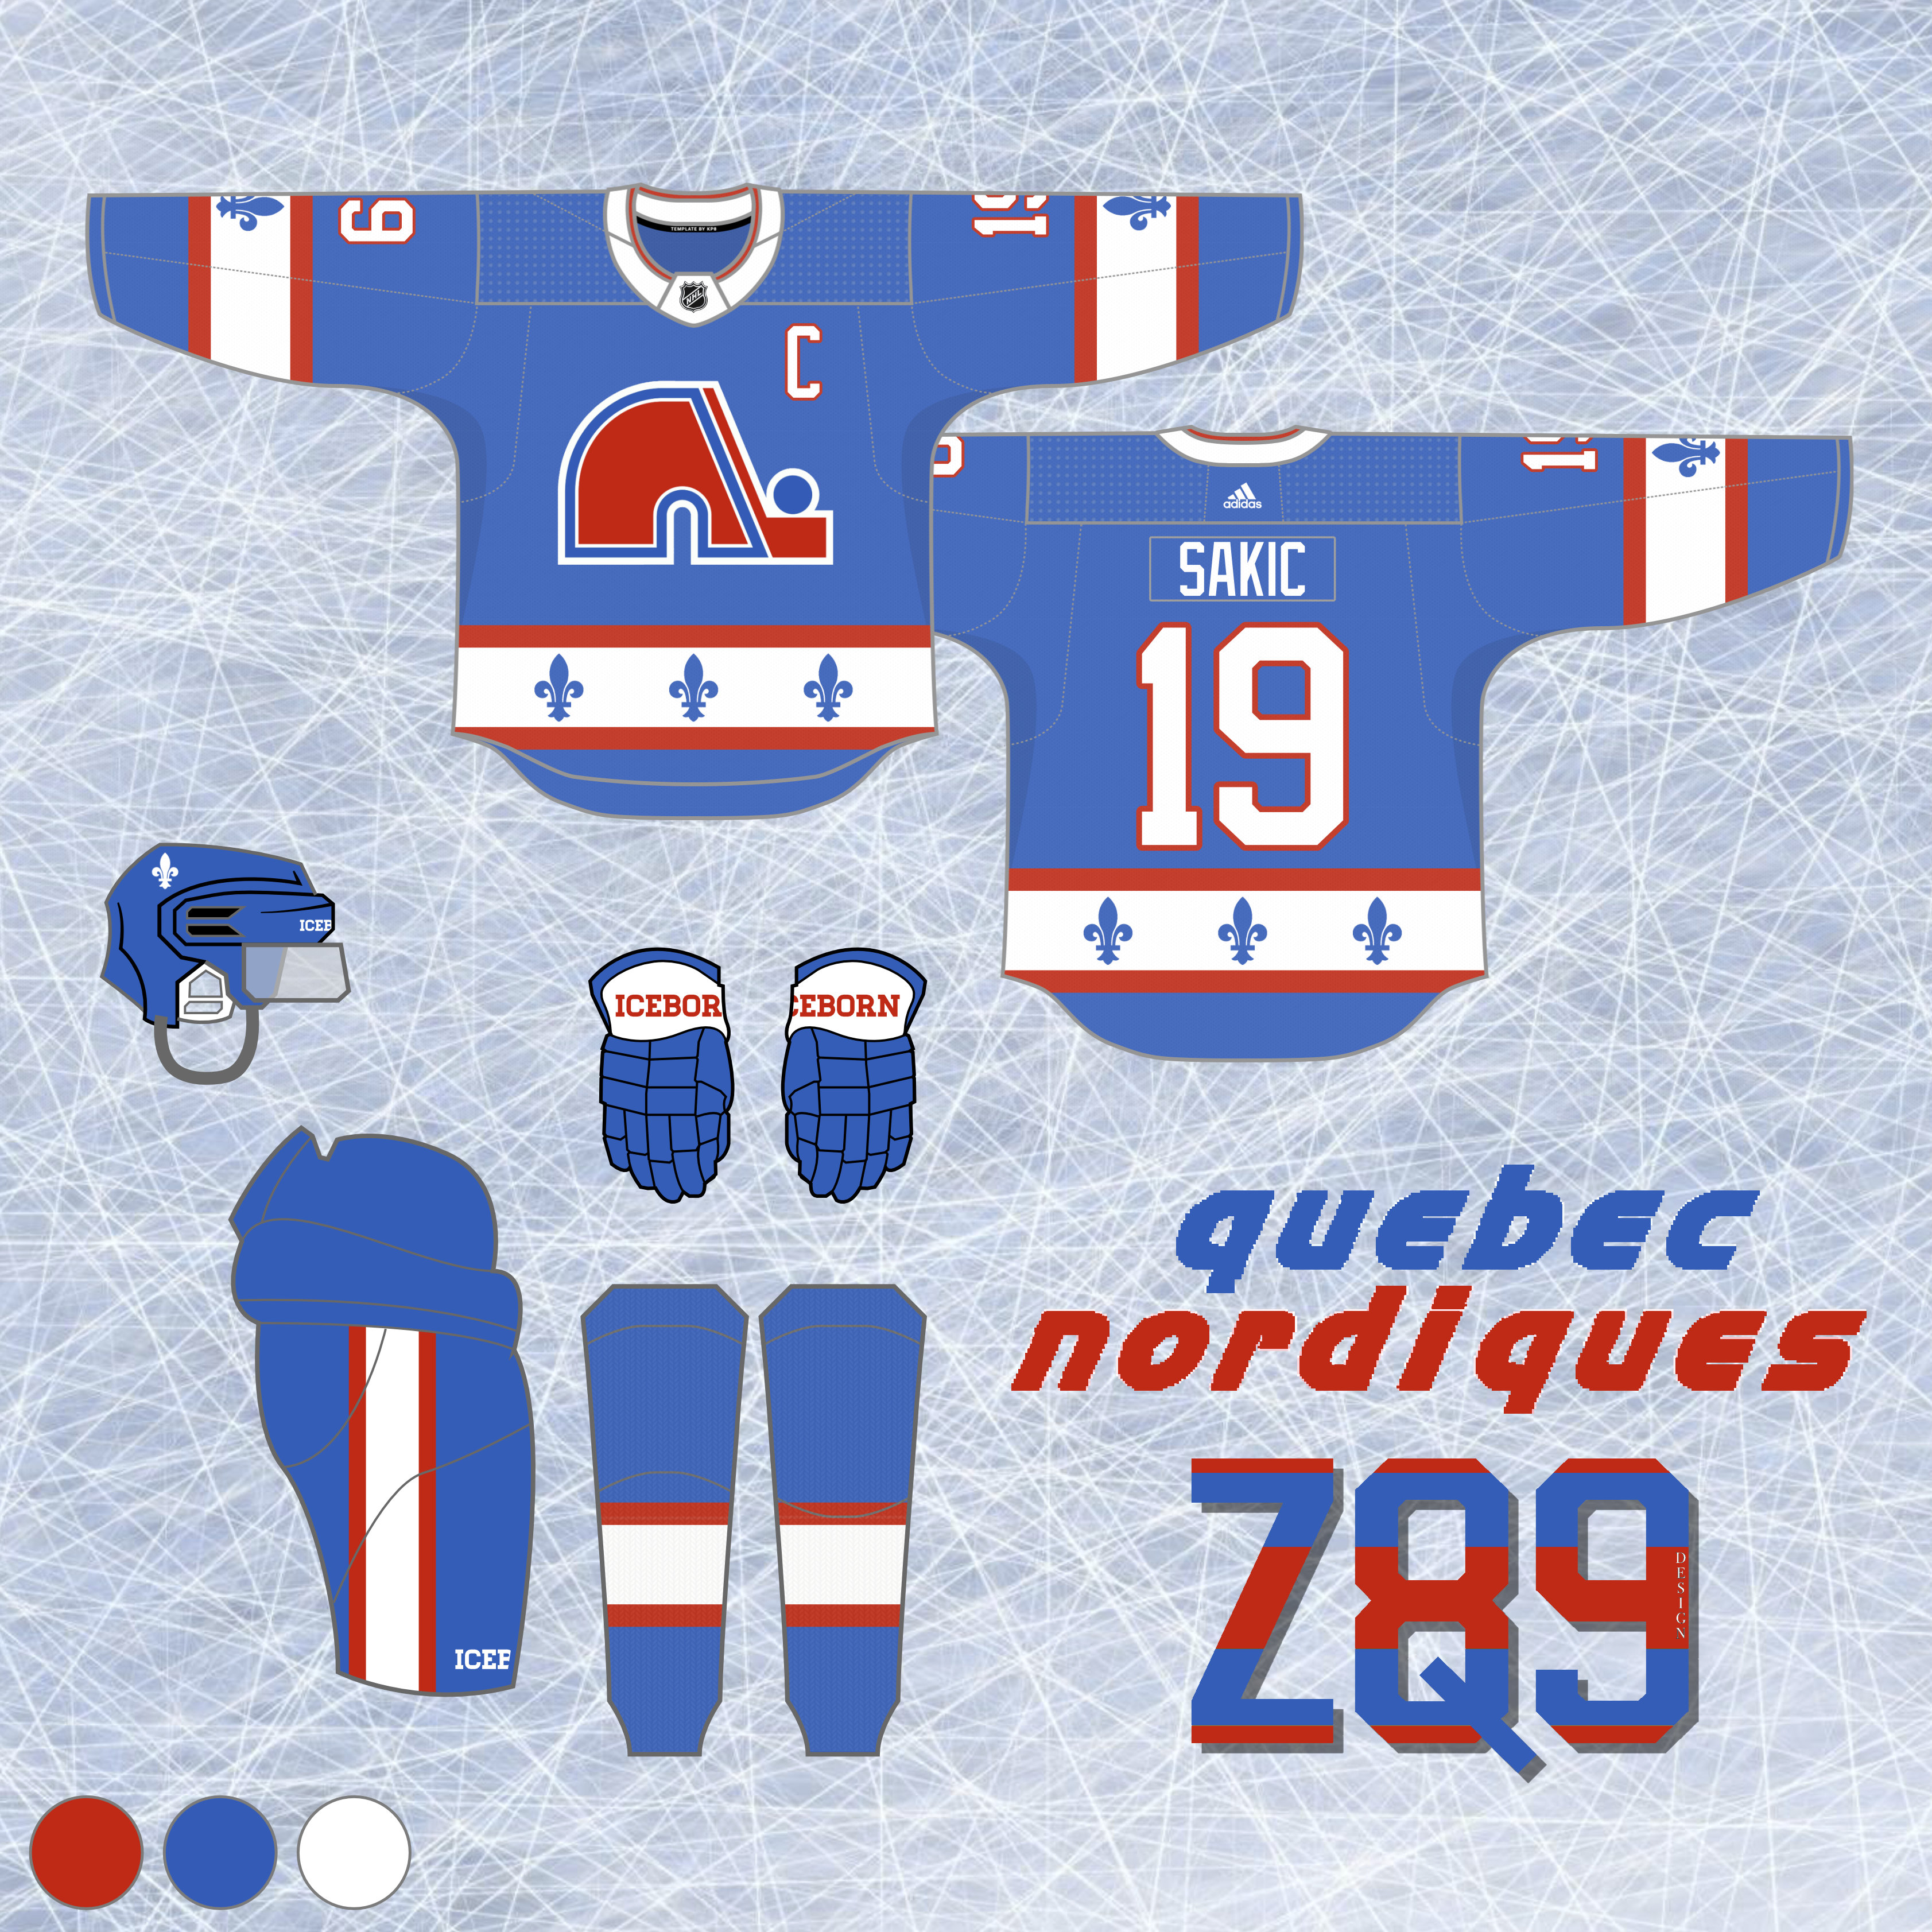 Z89Design on X: The home and away sets spread the colors around a little  more than the originals and add some waist and arm stripes. The  fleur-de-lis match the main jersey color